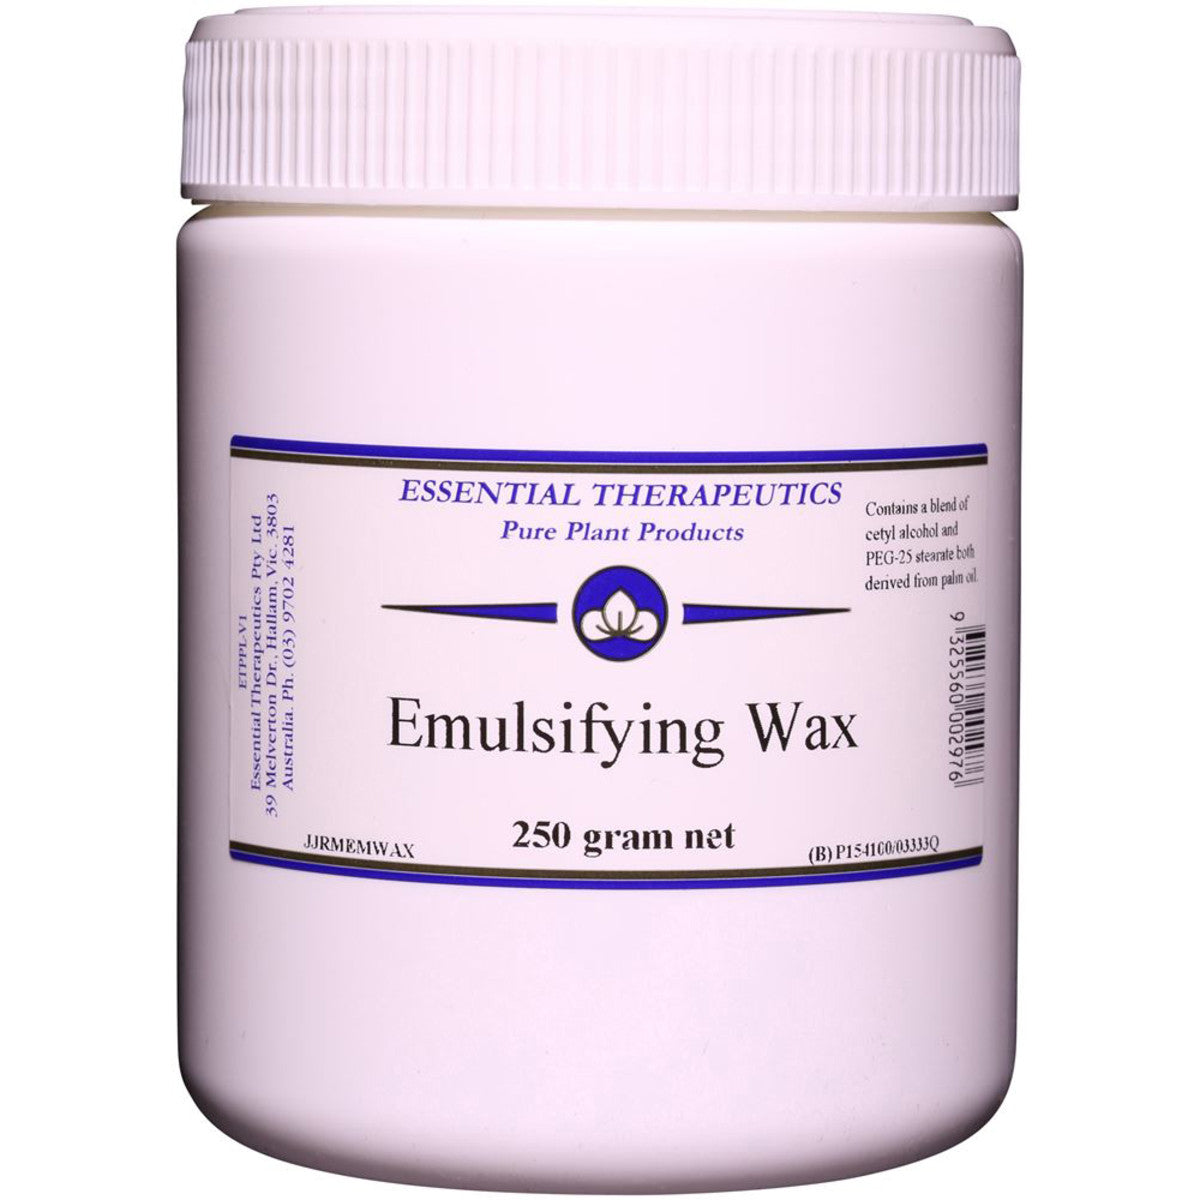 Essential Therapeutic - Emulsifying Wax 250g